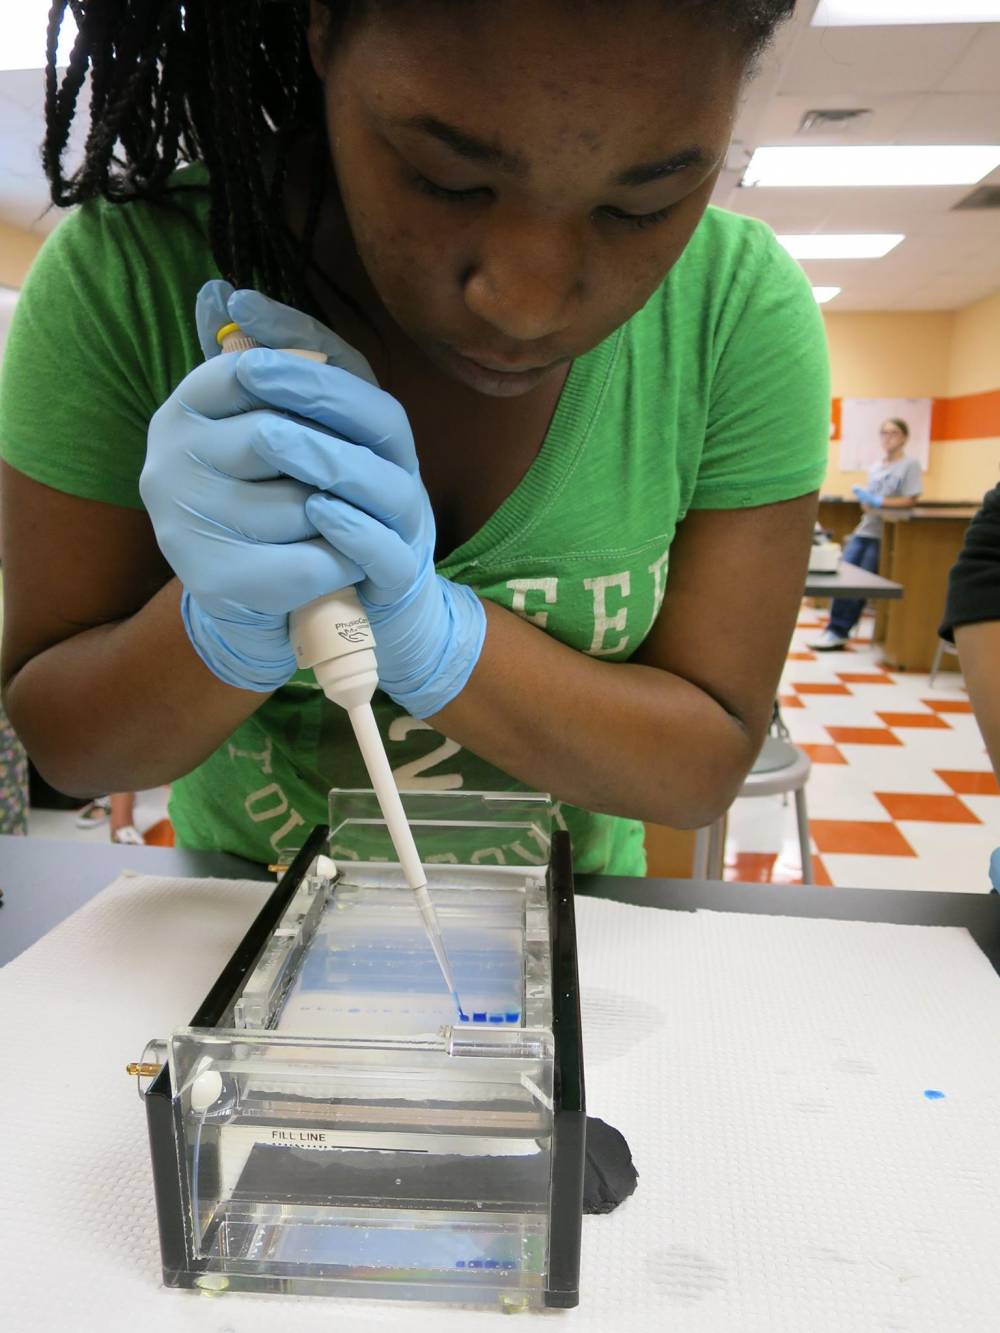 TOP SOUTH CAROLINA OVERNIGHT CAMP: Clemson University Summer Science Camps is a Top Overnight Summer Camp located in Clemson South Carolina offering many fun and enriching Overnight and other camp programs. 